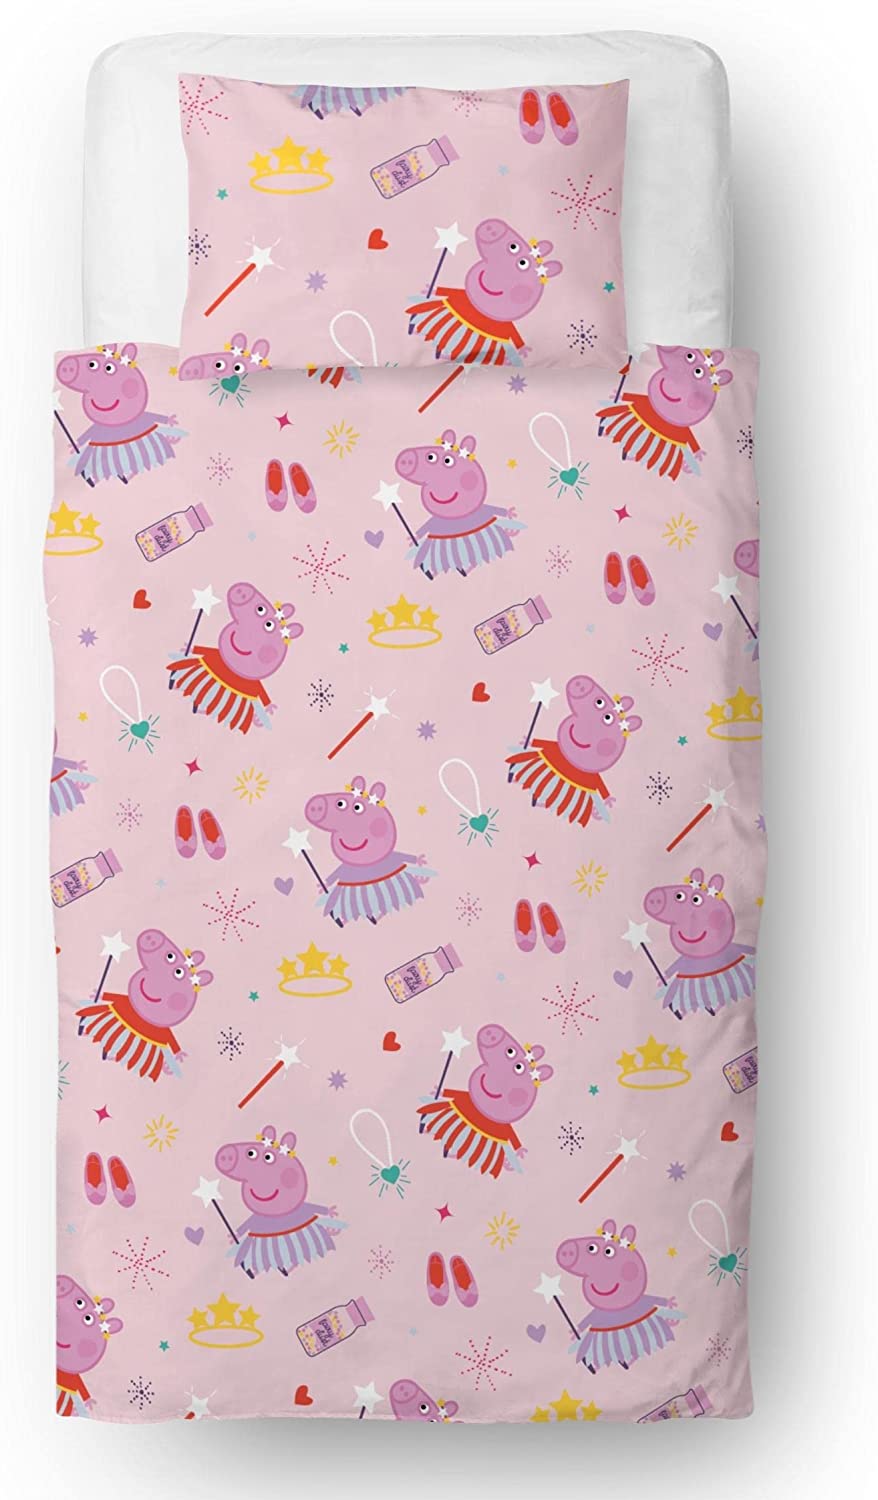 Wholesale x 3 Official Peppa Pig Single Bed 'Magic' Duvet Cover Set Character Bedding